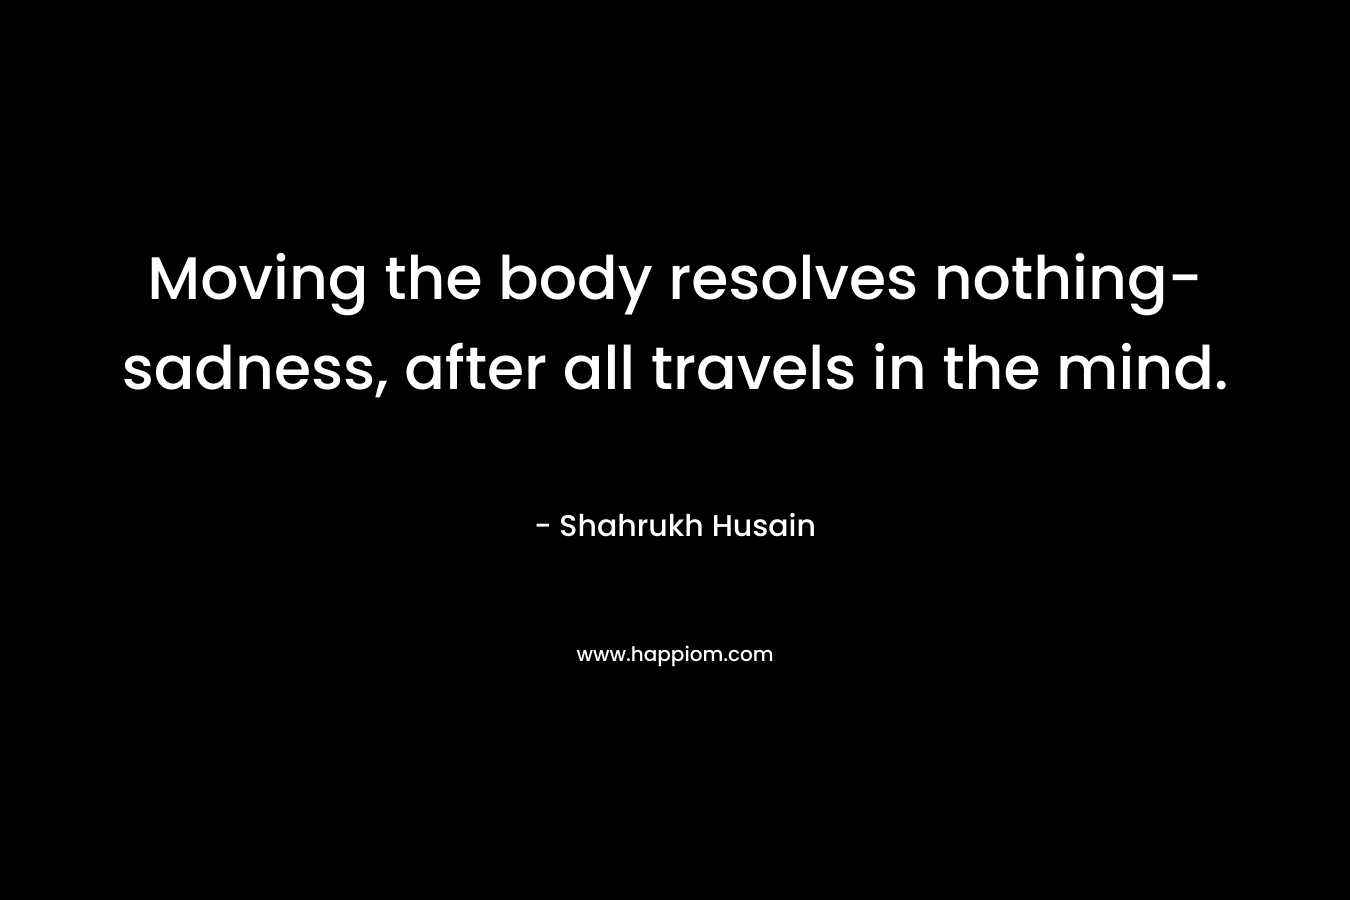 Moving the body resolves nothing- sadness, after all travels in the mind. – Shahrukh Husain